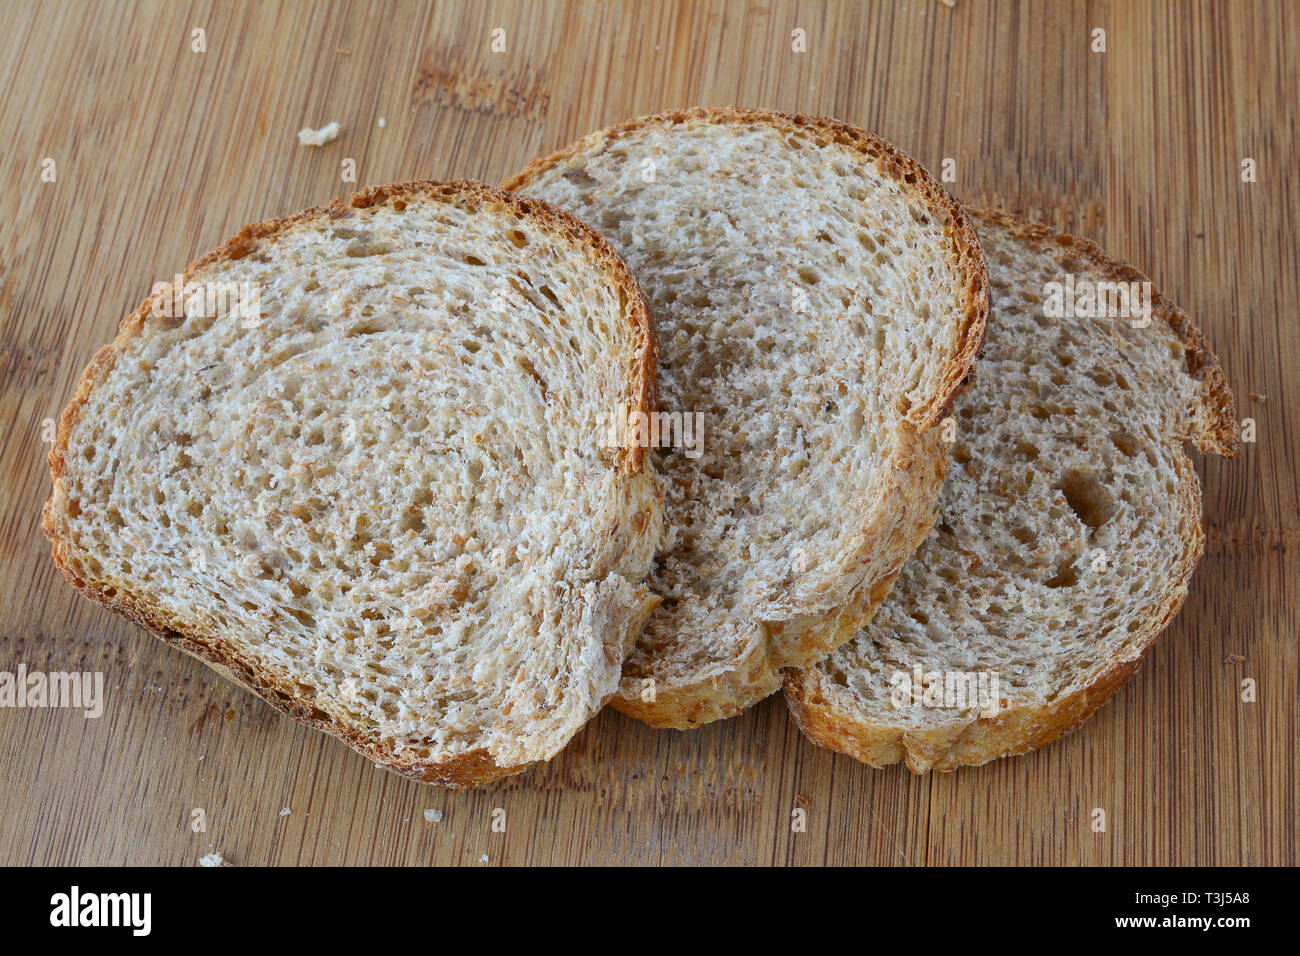 Three slices of dark, integral  bread, delicious and healthy, on bamboo wooden chopping board, close up view Stock Photo